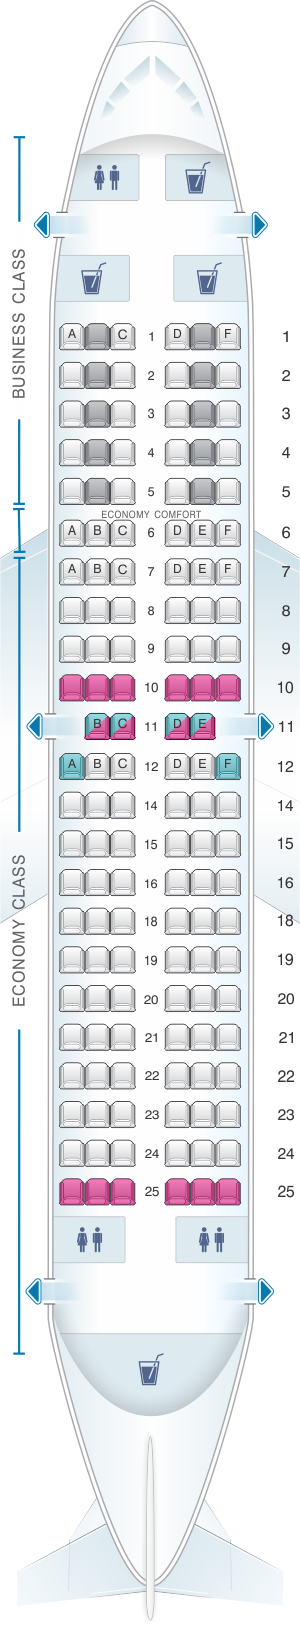 Seat map for KLM Boeing B737 700